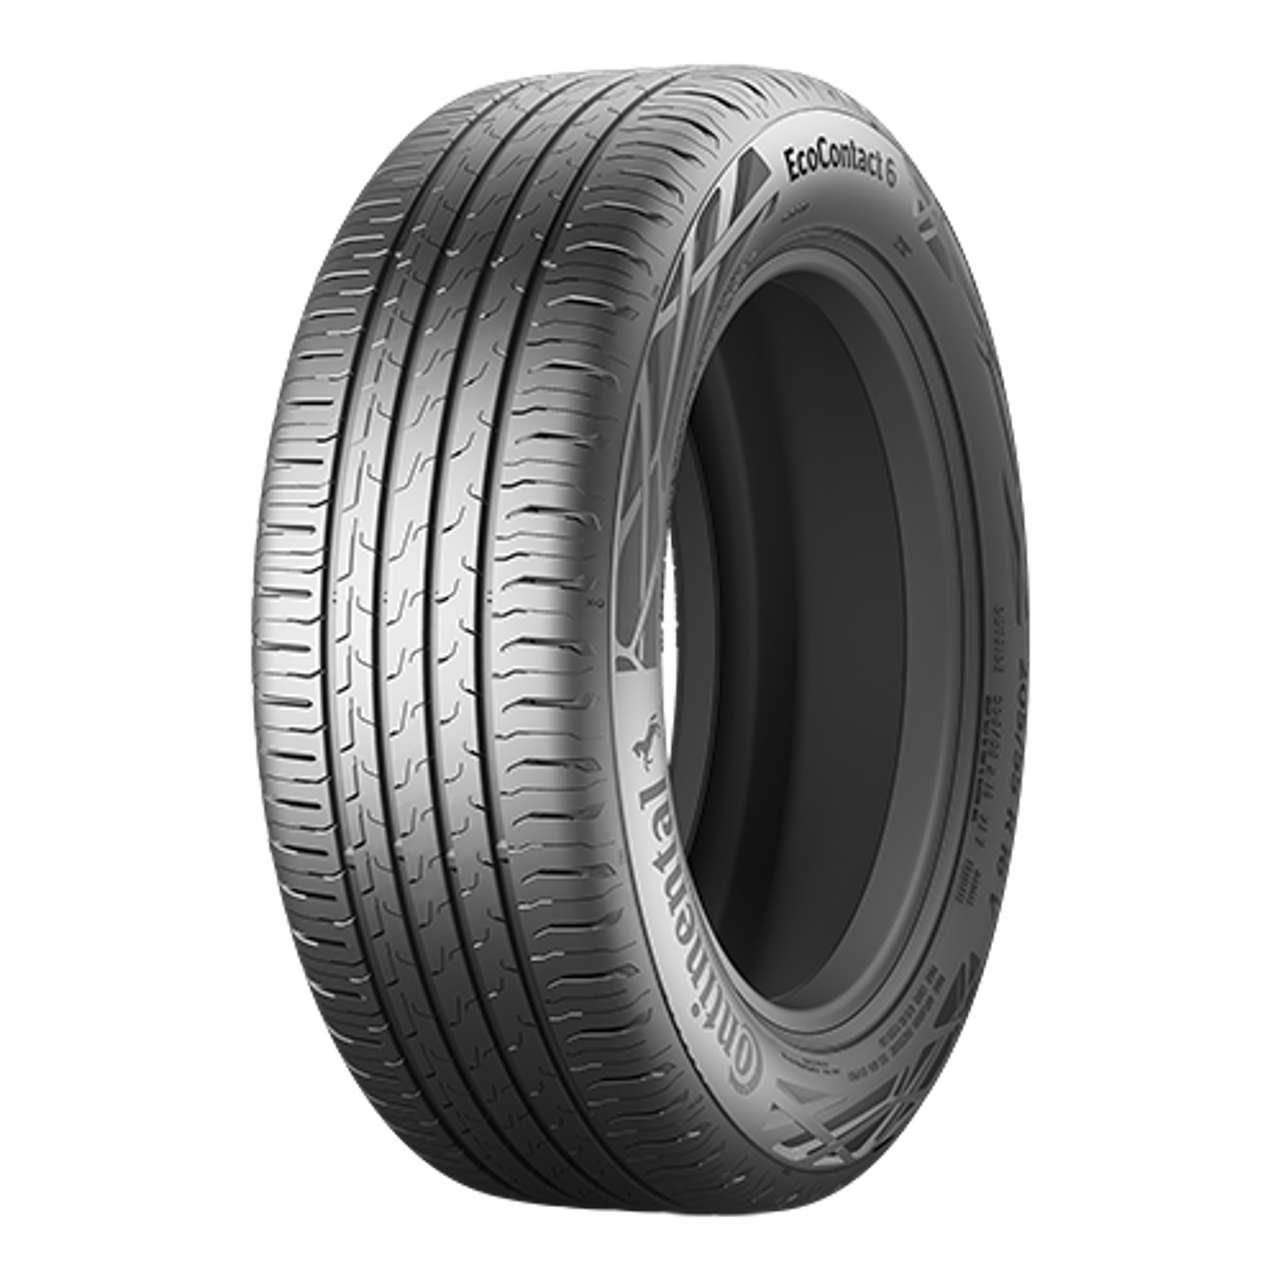 CONTINENTAL ECOCONTACT 6 (EVc) 155/70R13 75T von Continental